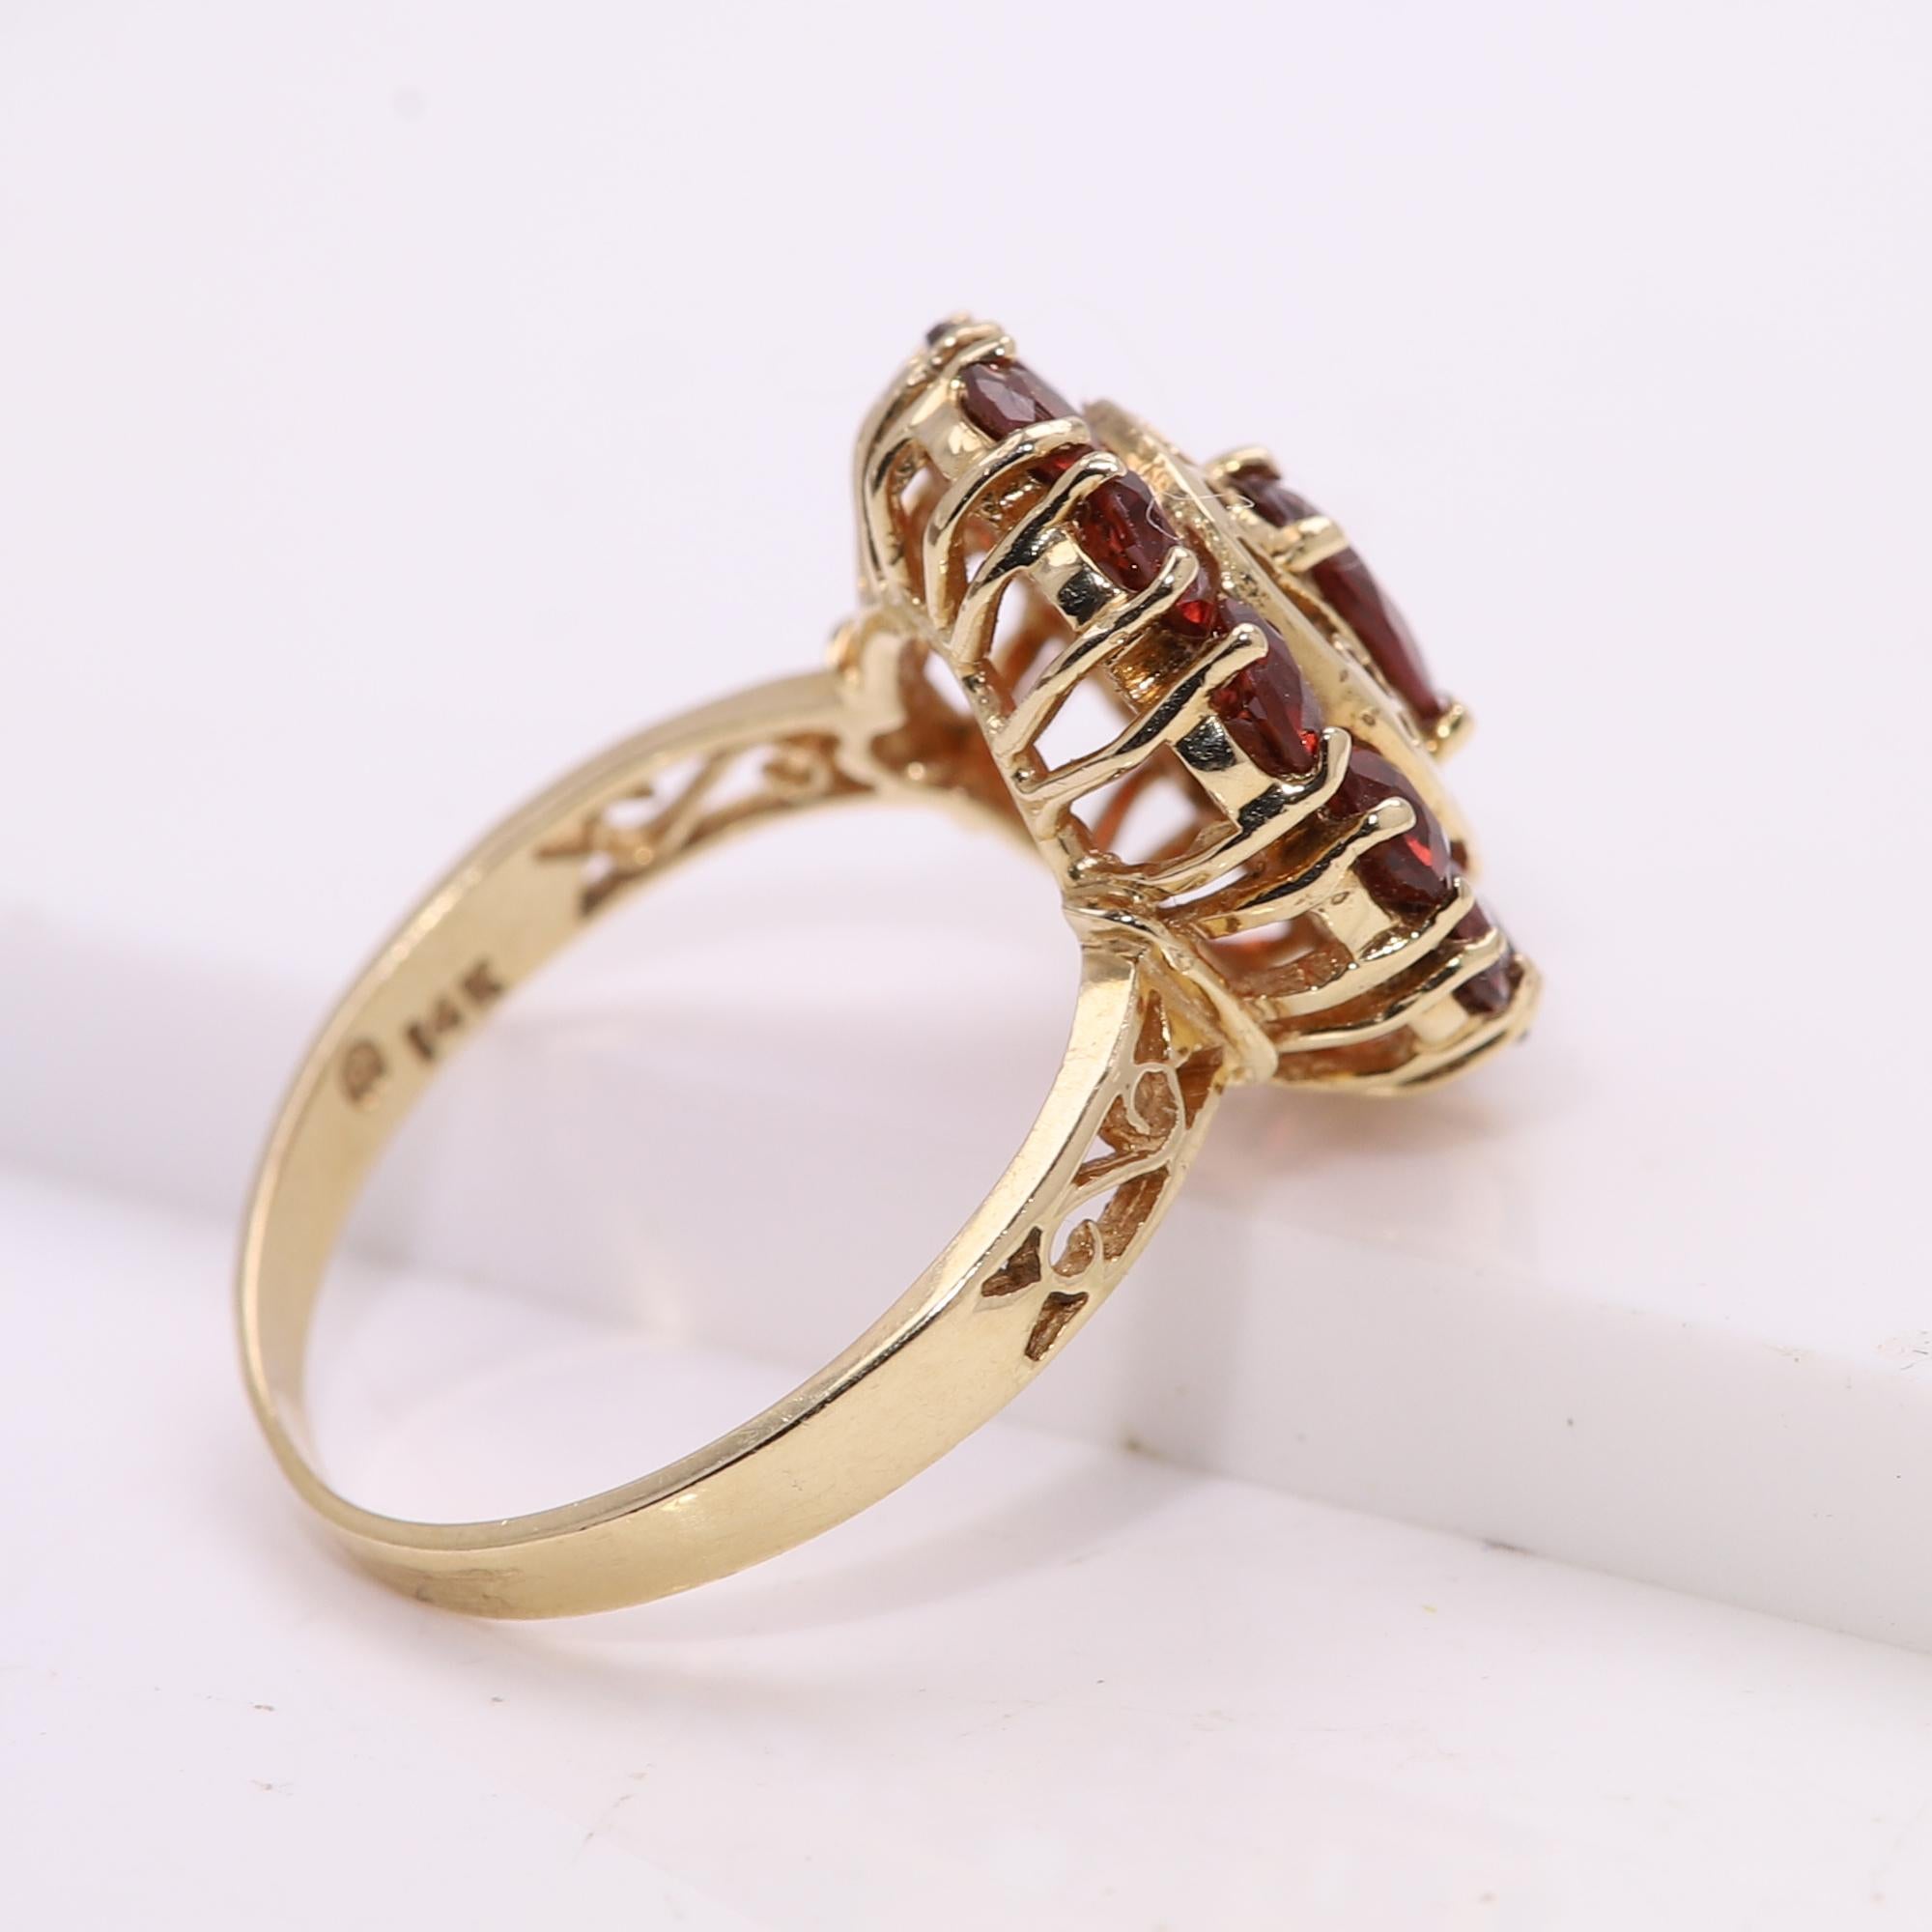 Garnet Cocktail Ring 14 Karat Yellow Gold Large Cluster Fashion Ring In Excellent Condition For Sale In Brooklyn, NY